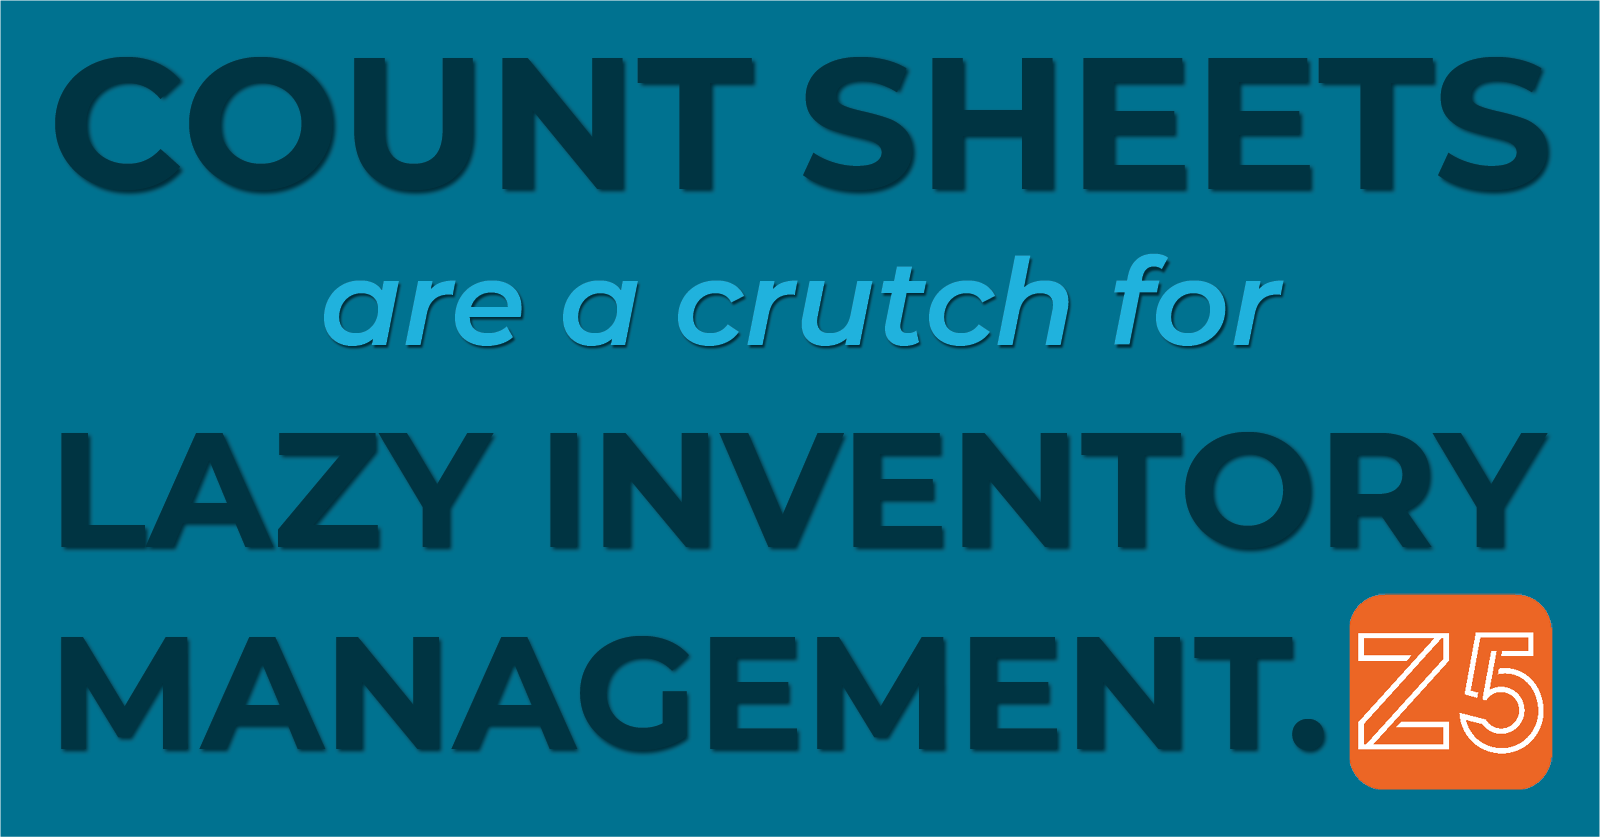 Count sheets are a crutch for lazy inventory management.